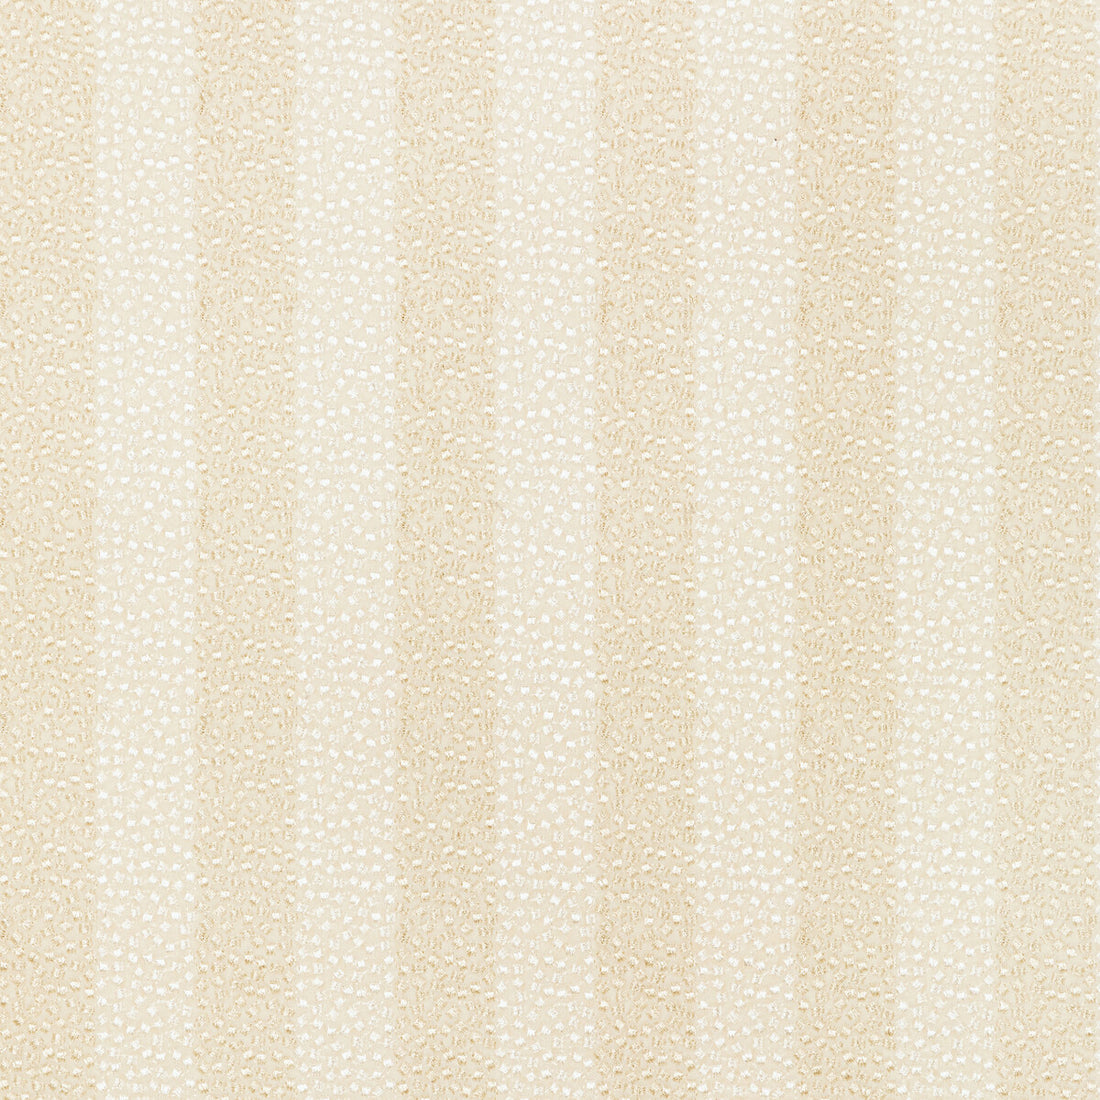 Proximity fabric in cream color - pattern 36341.1.0 - by Kravet Couture in the Modern Luxe III collection